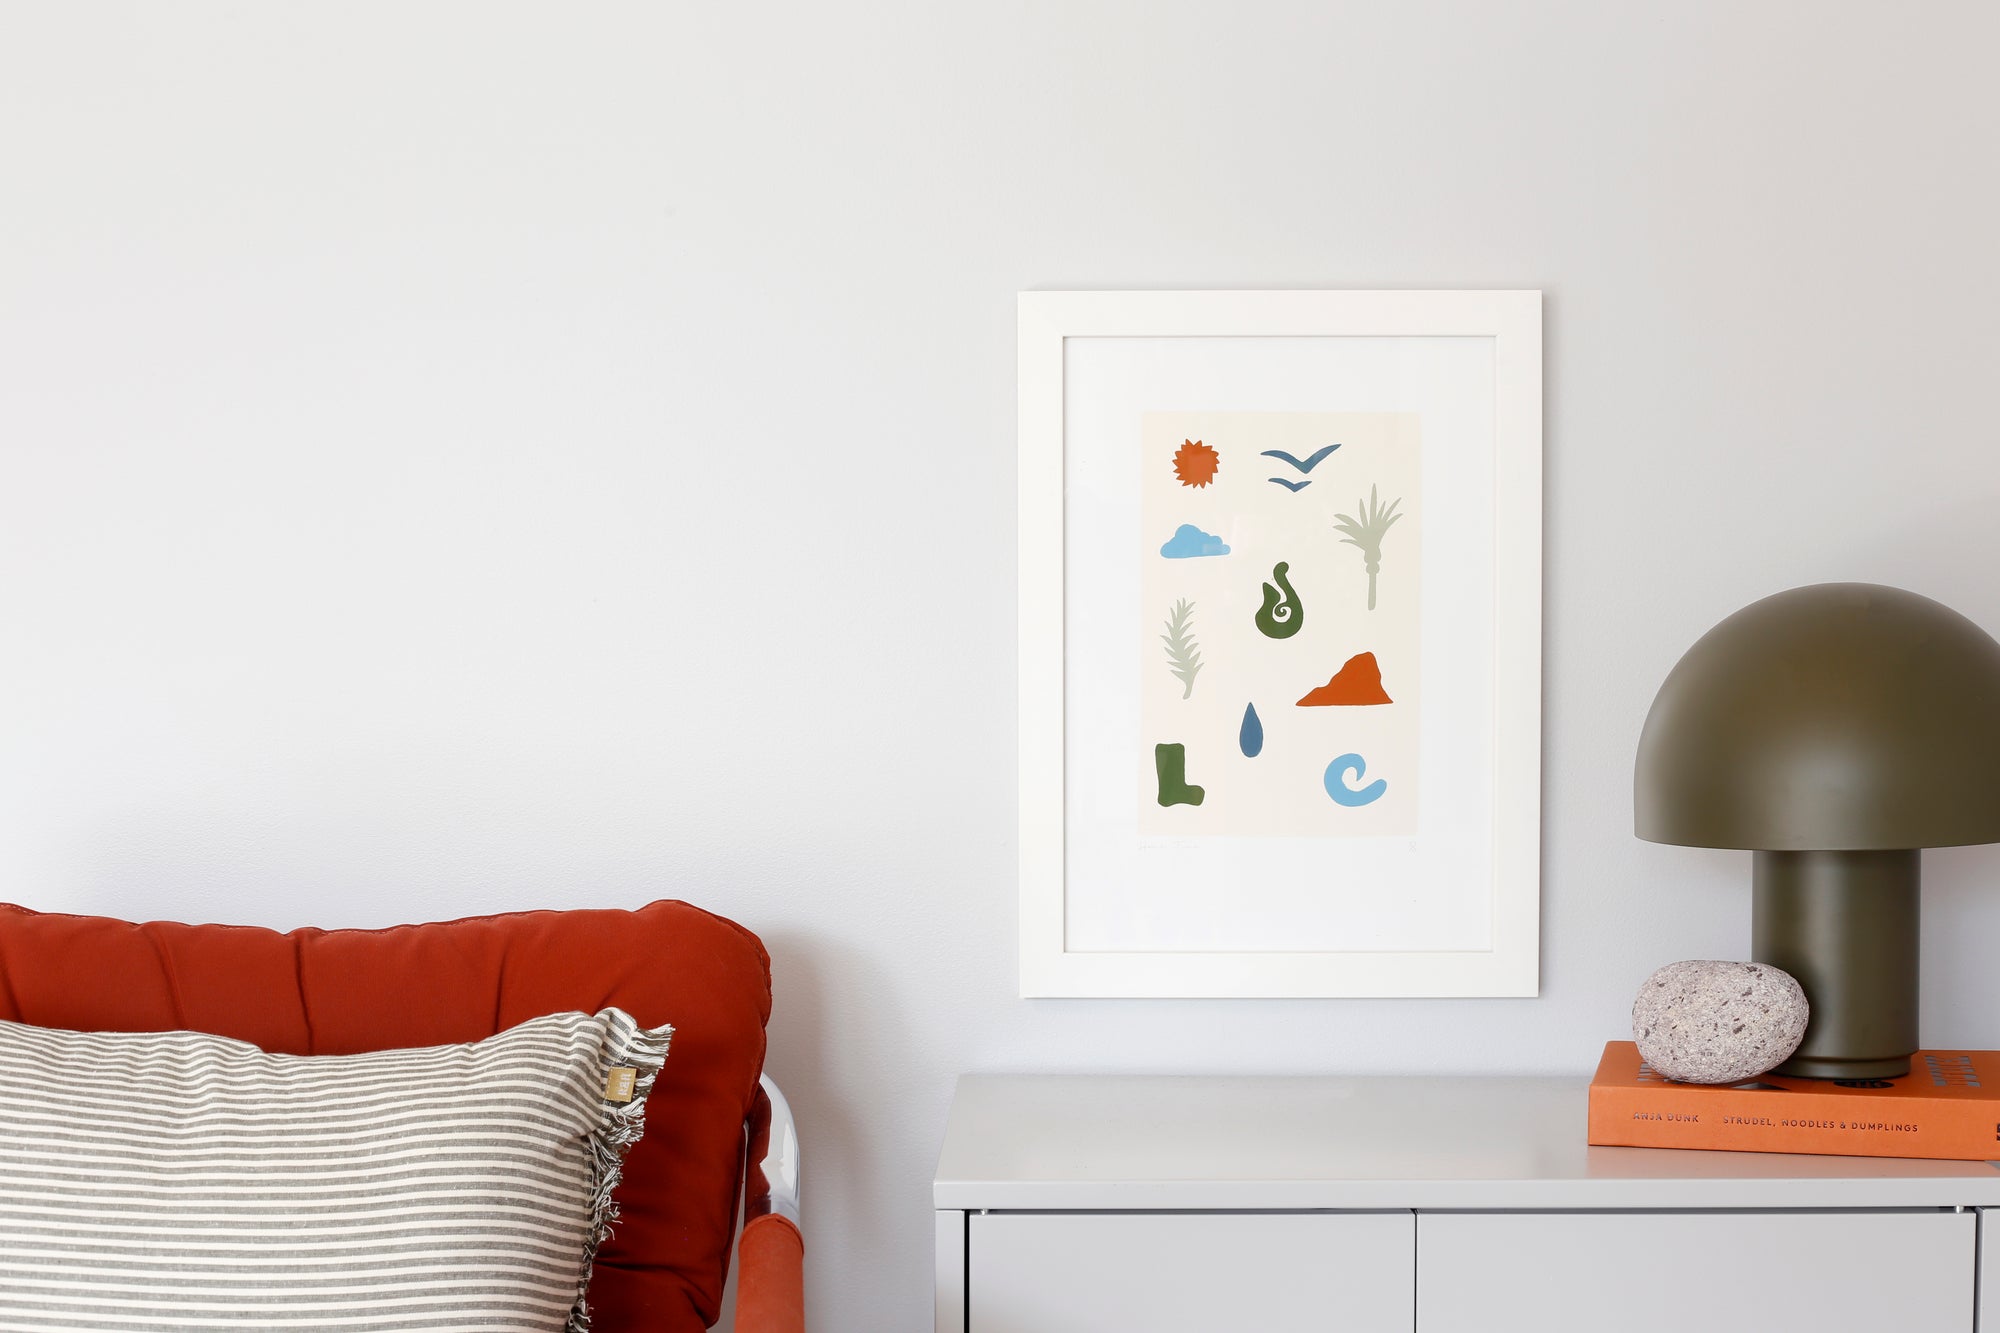 How to care for fine art prints at home